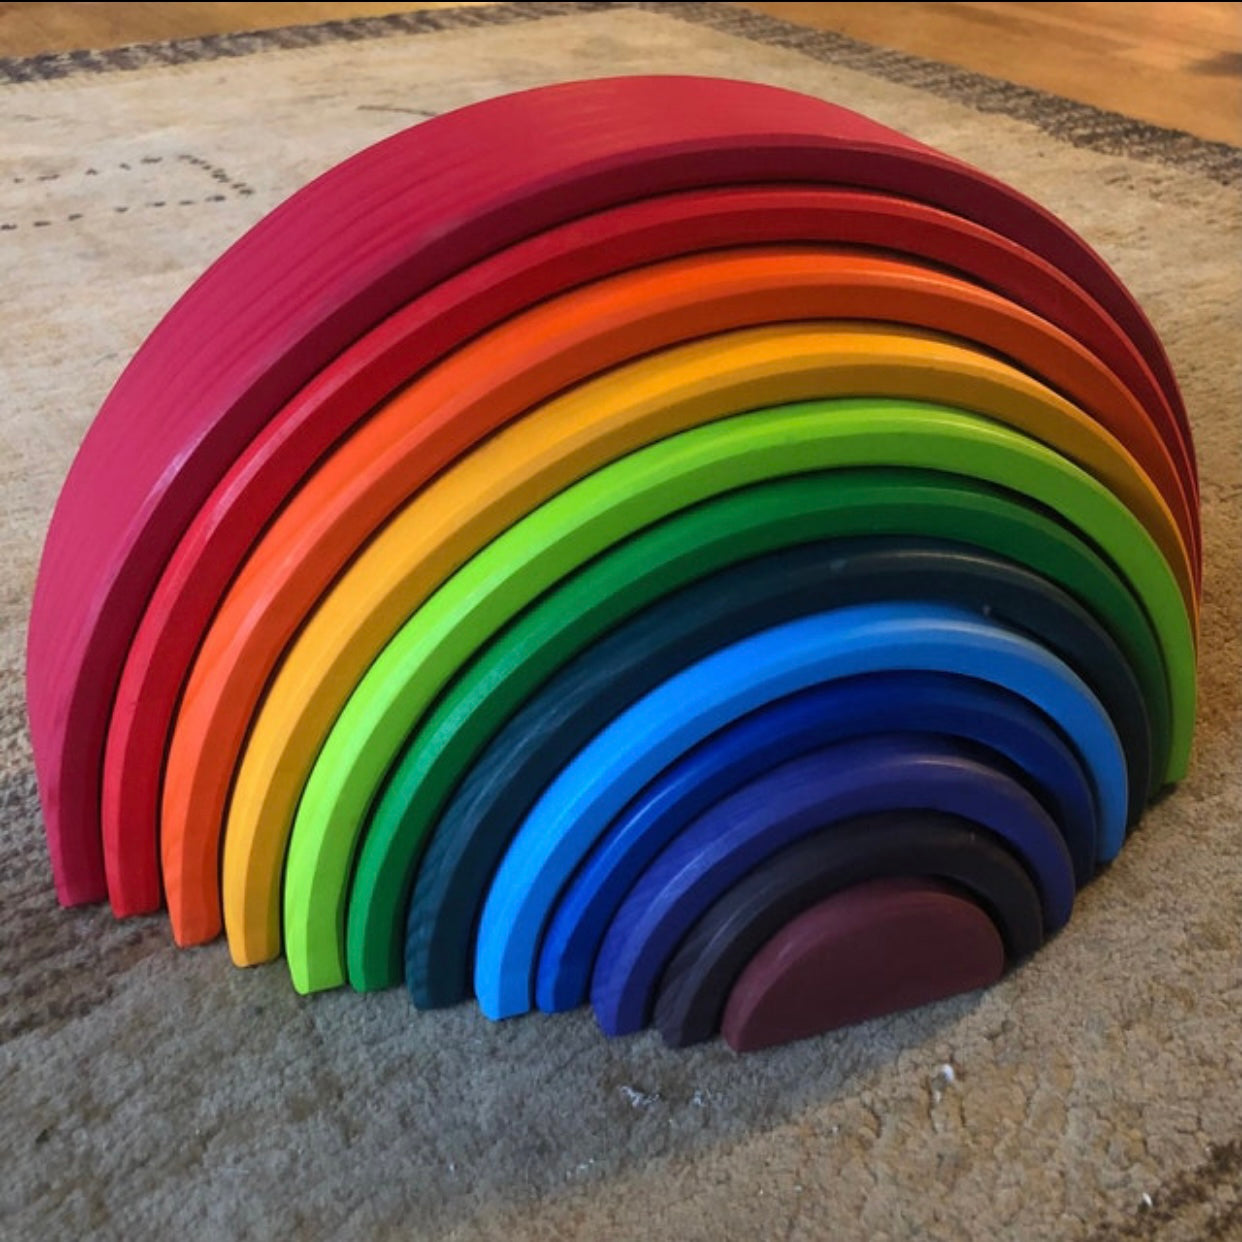 Art Supplies for Kids and Adults, 7 Colors in 1 Wooden Rainbow